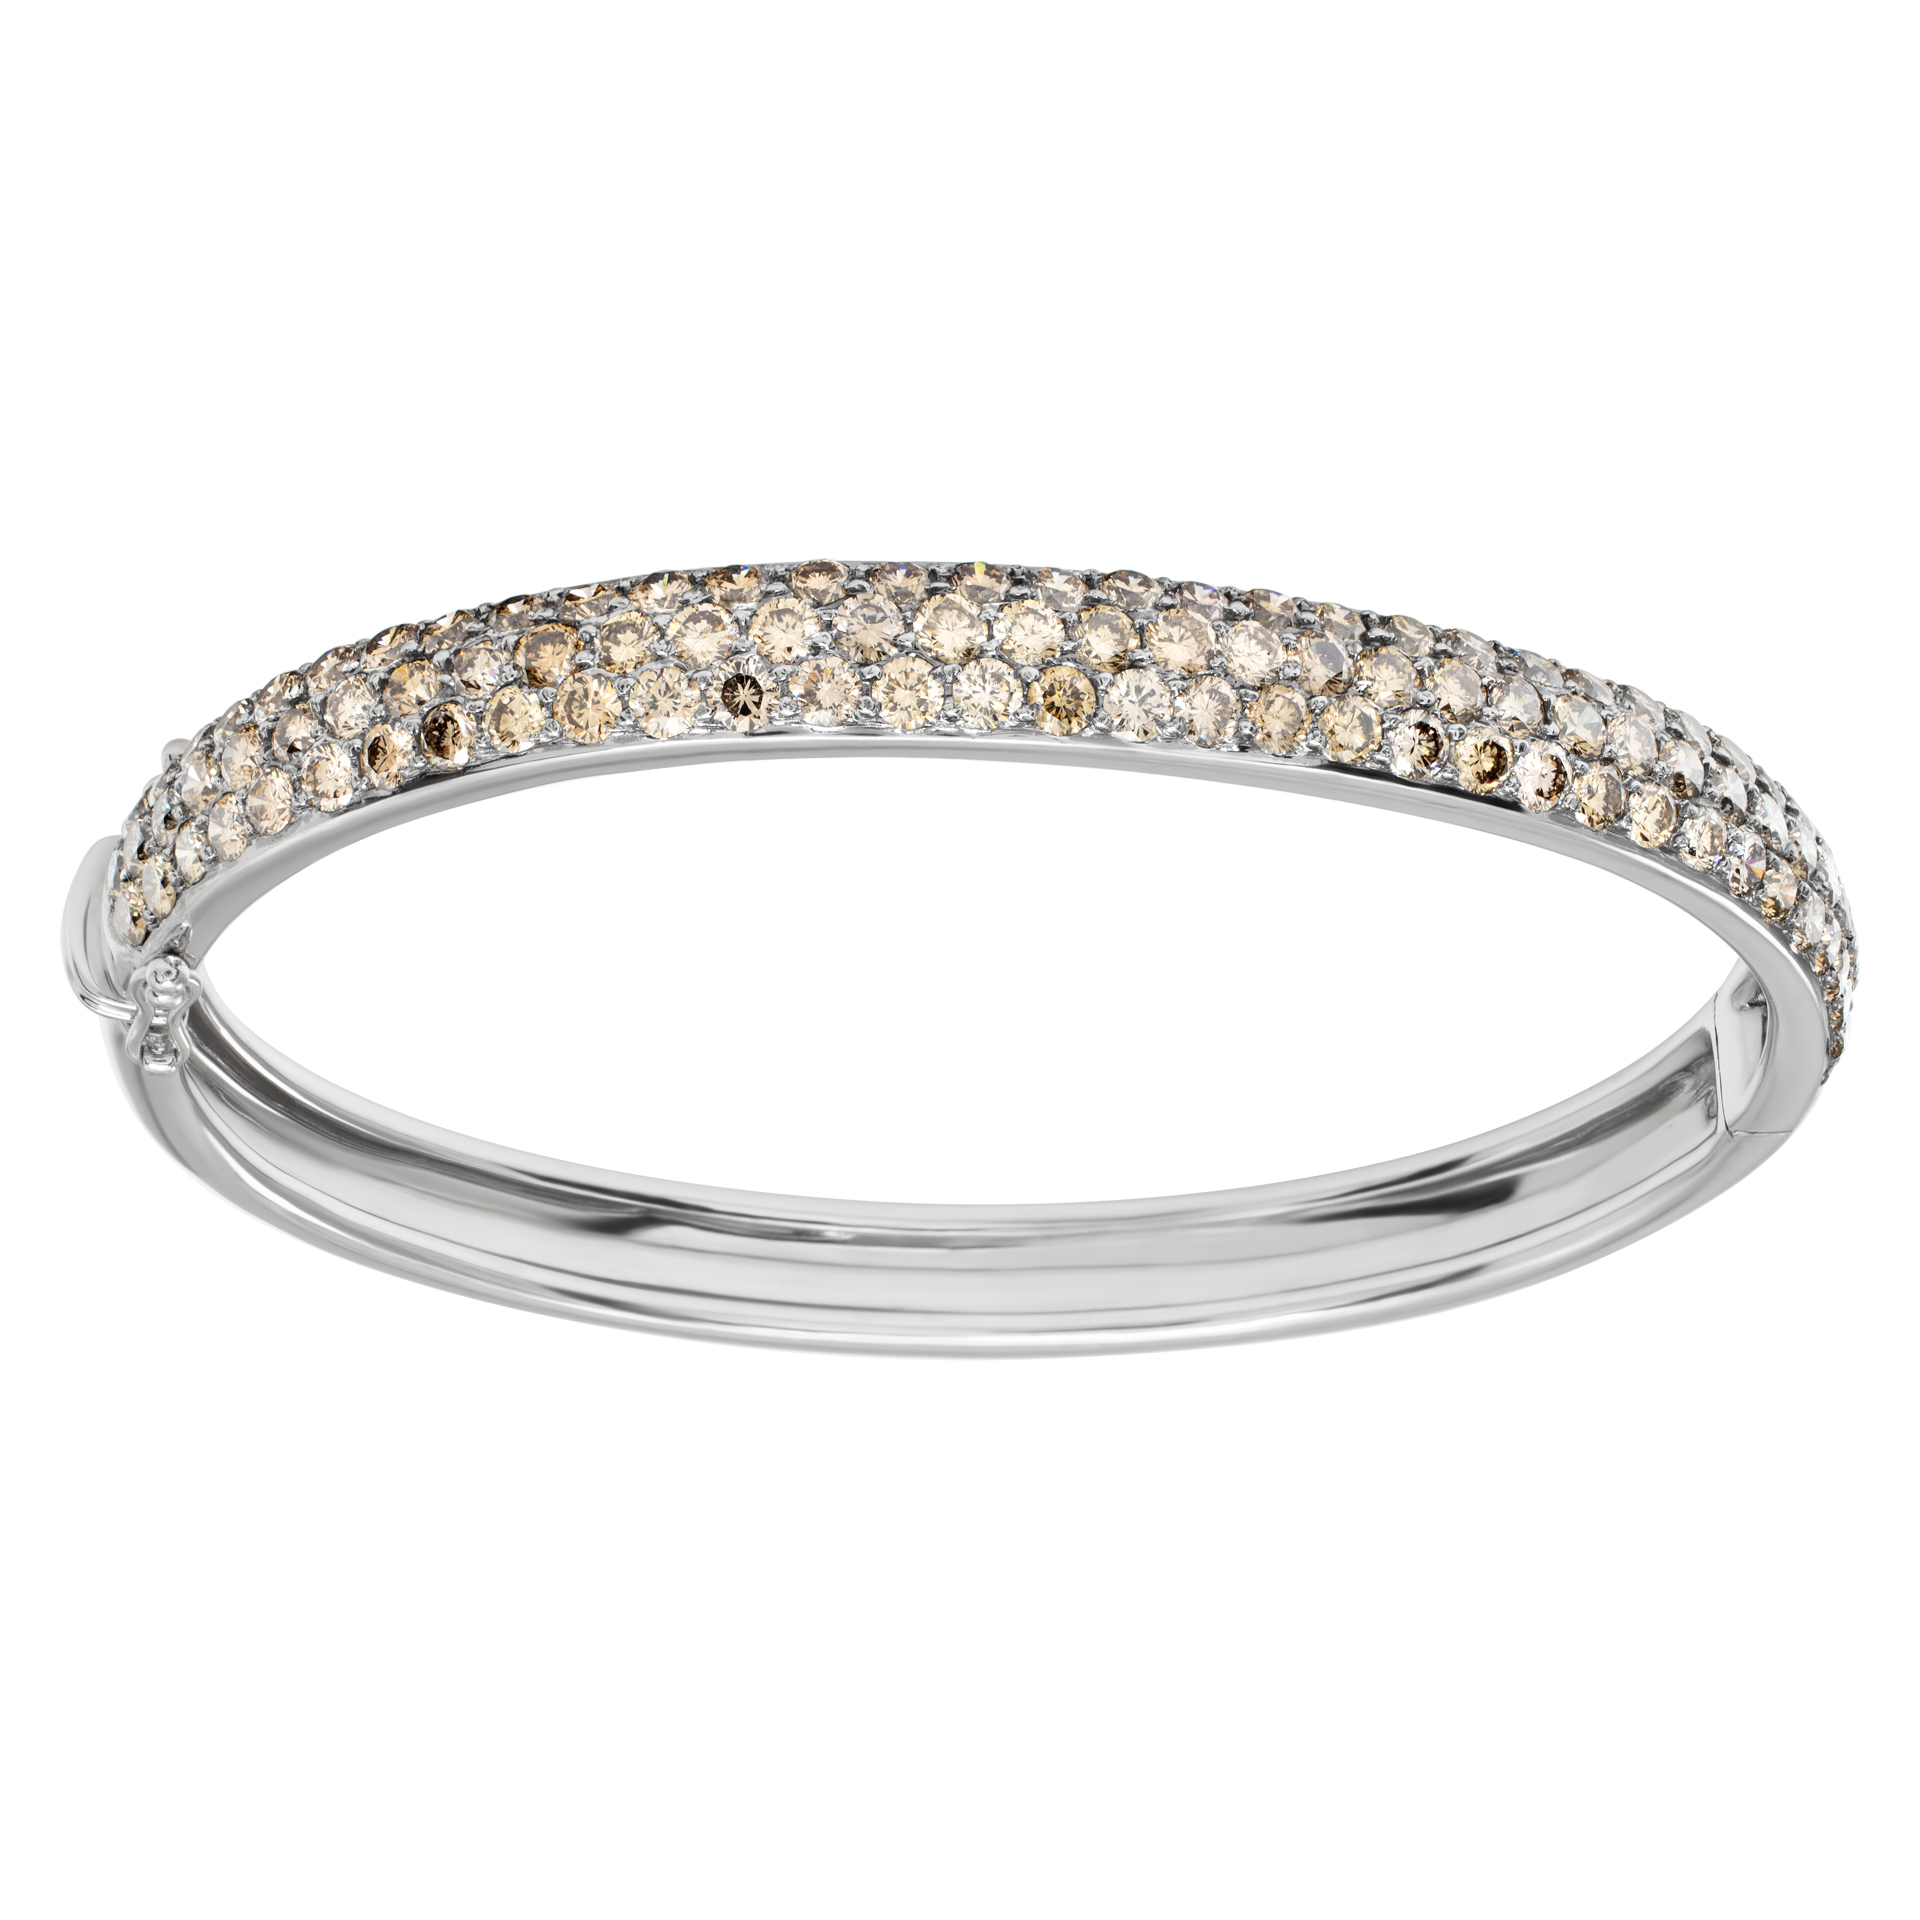 Bangle with brown diamonds in 18k white gold